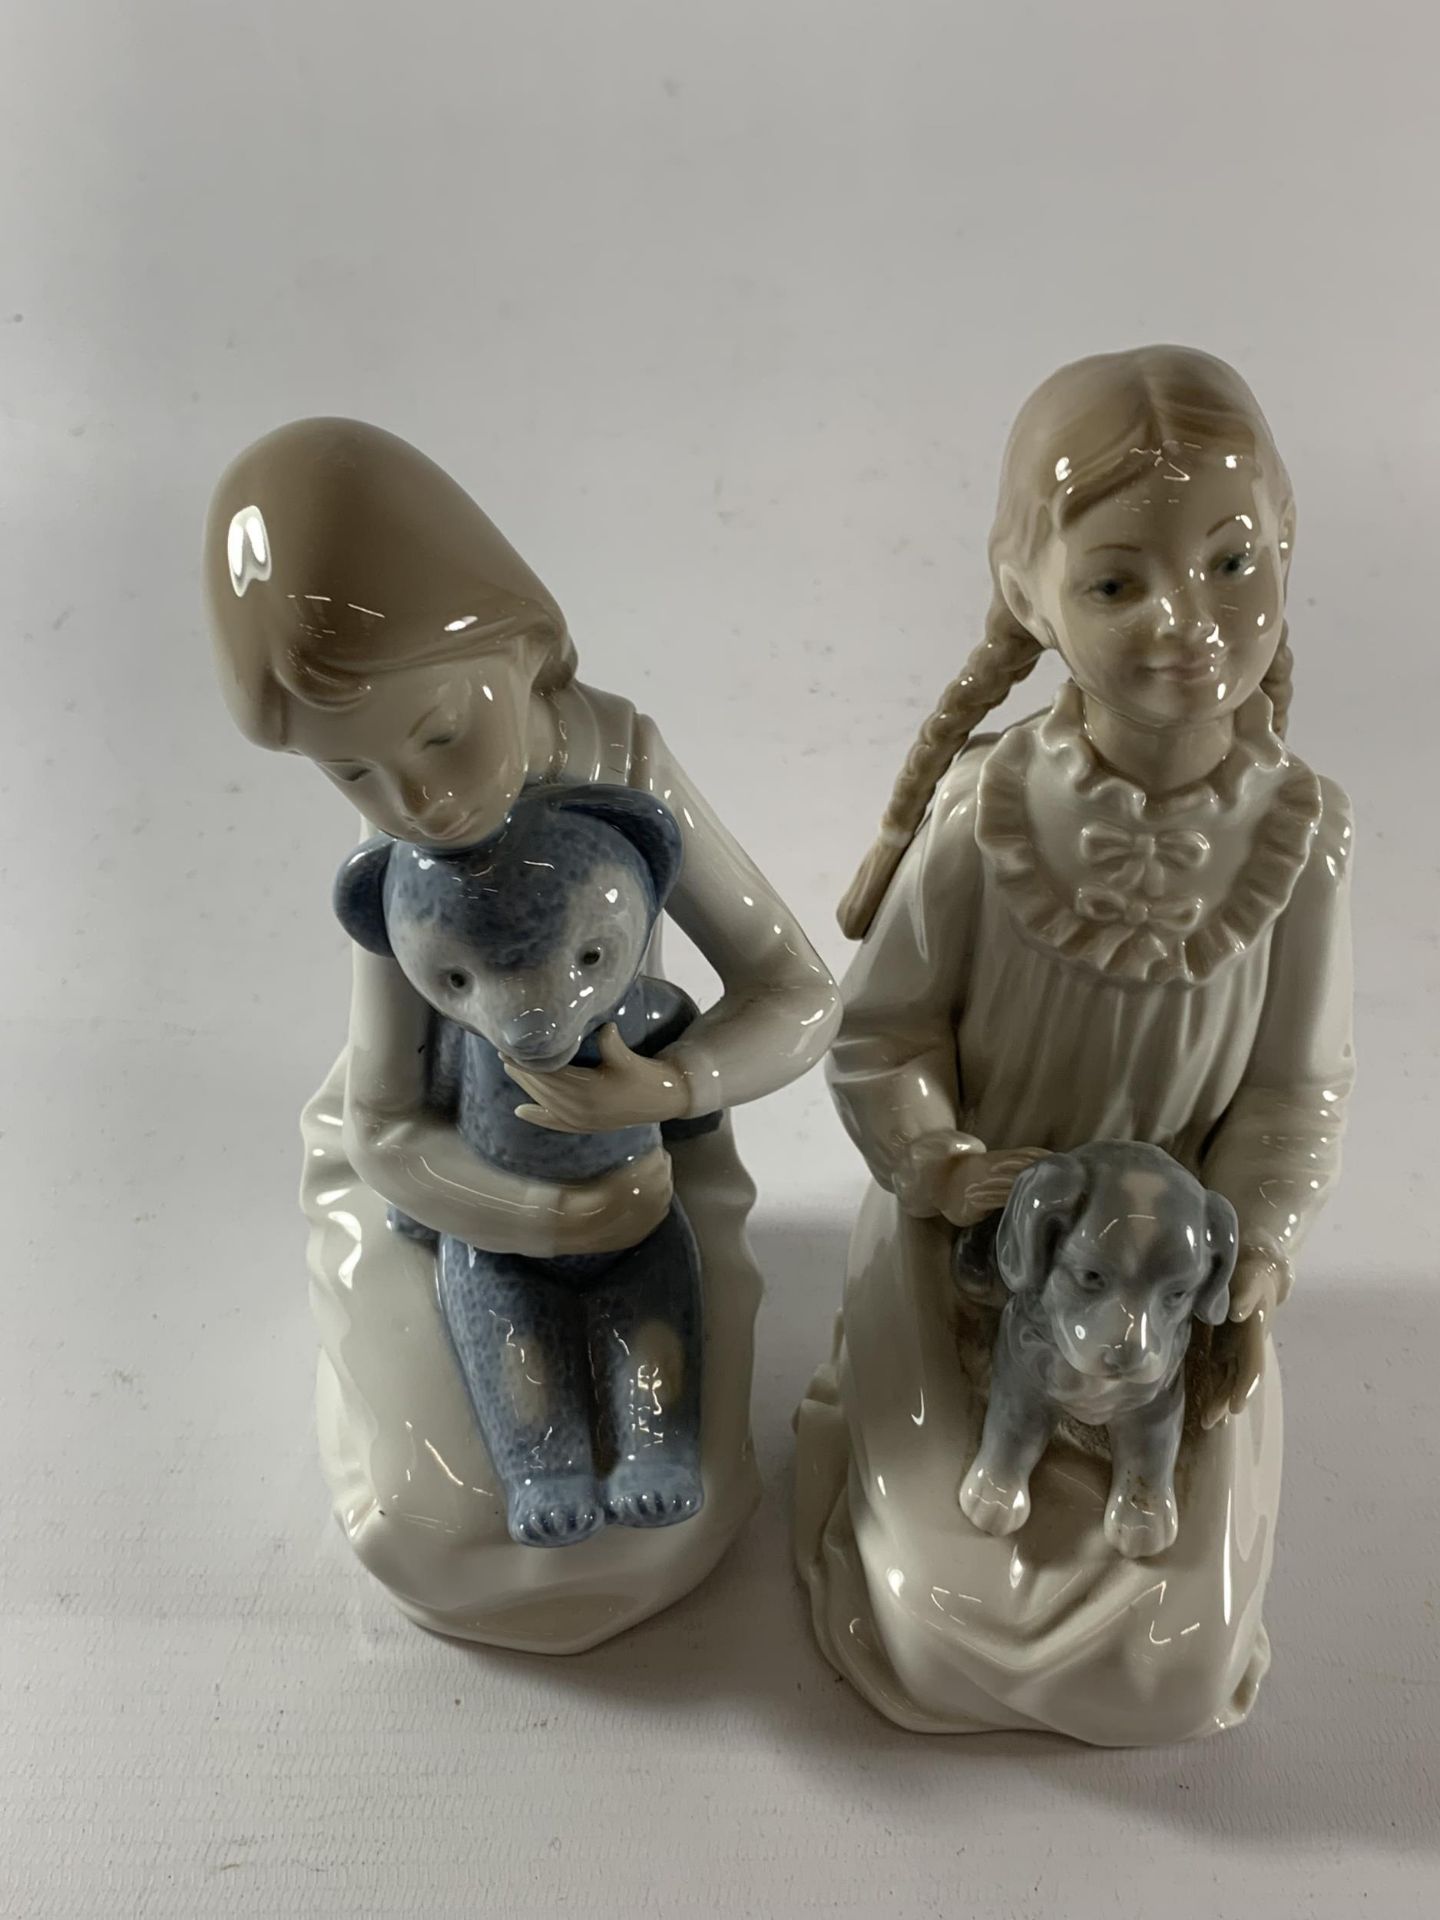 TWO NAO GIRL FIGURES - ONE WITH A DOLL AND ONE WITH A TEDDY BEAR